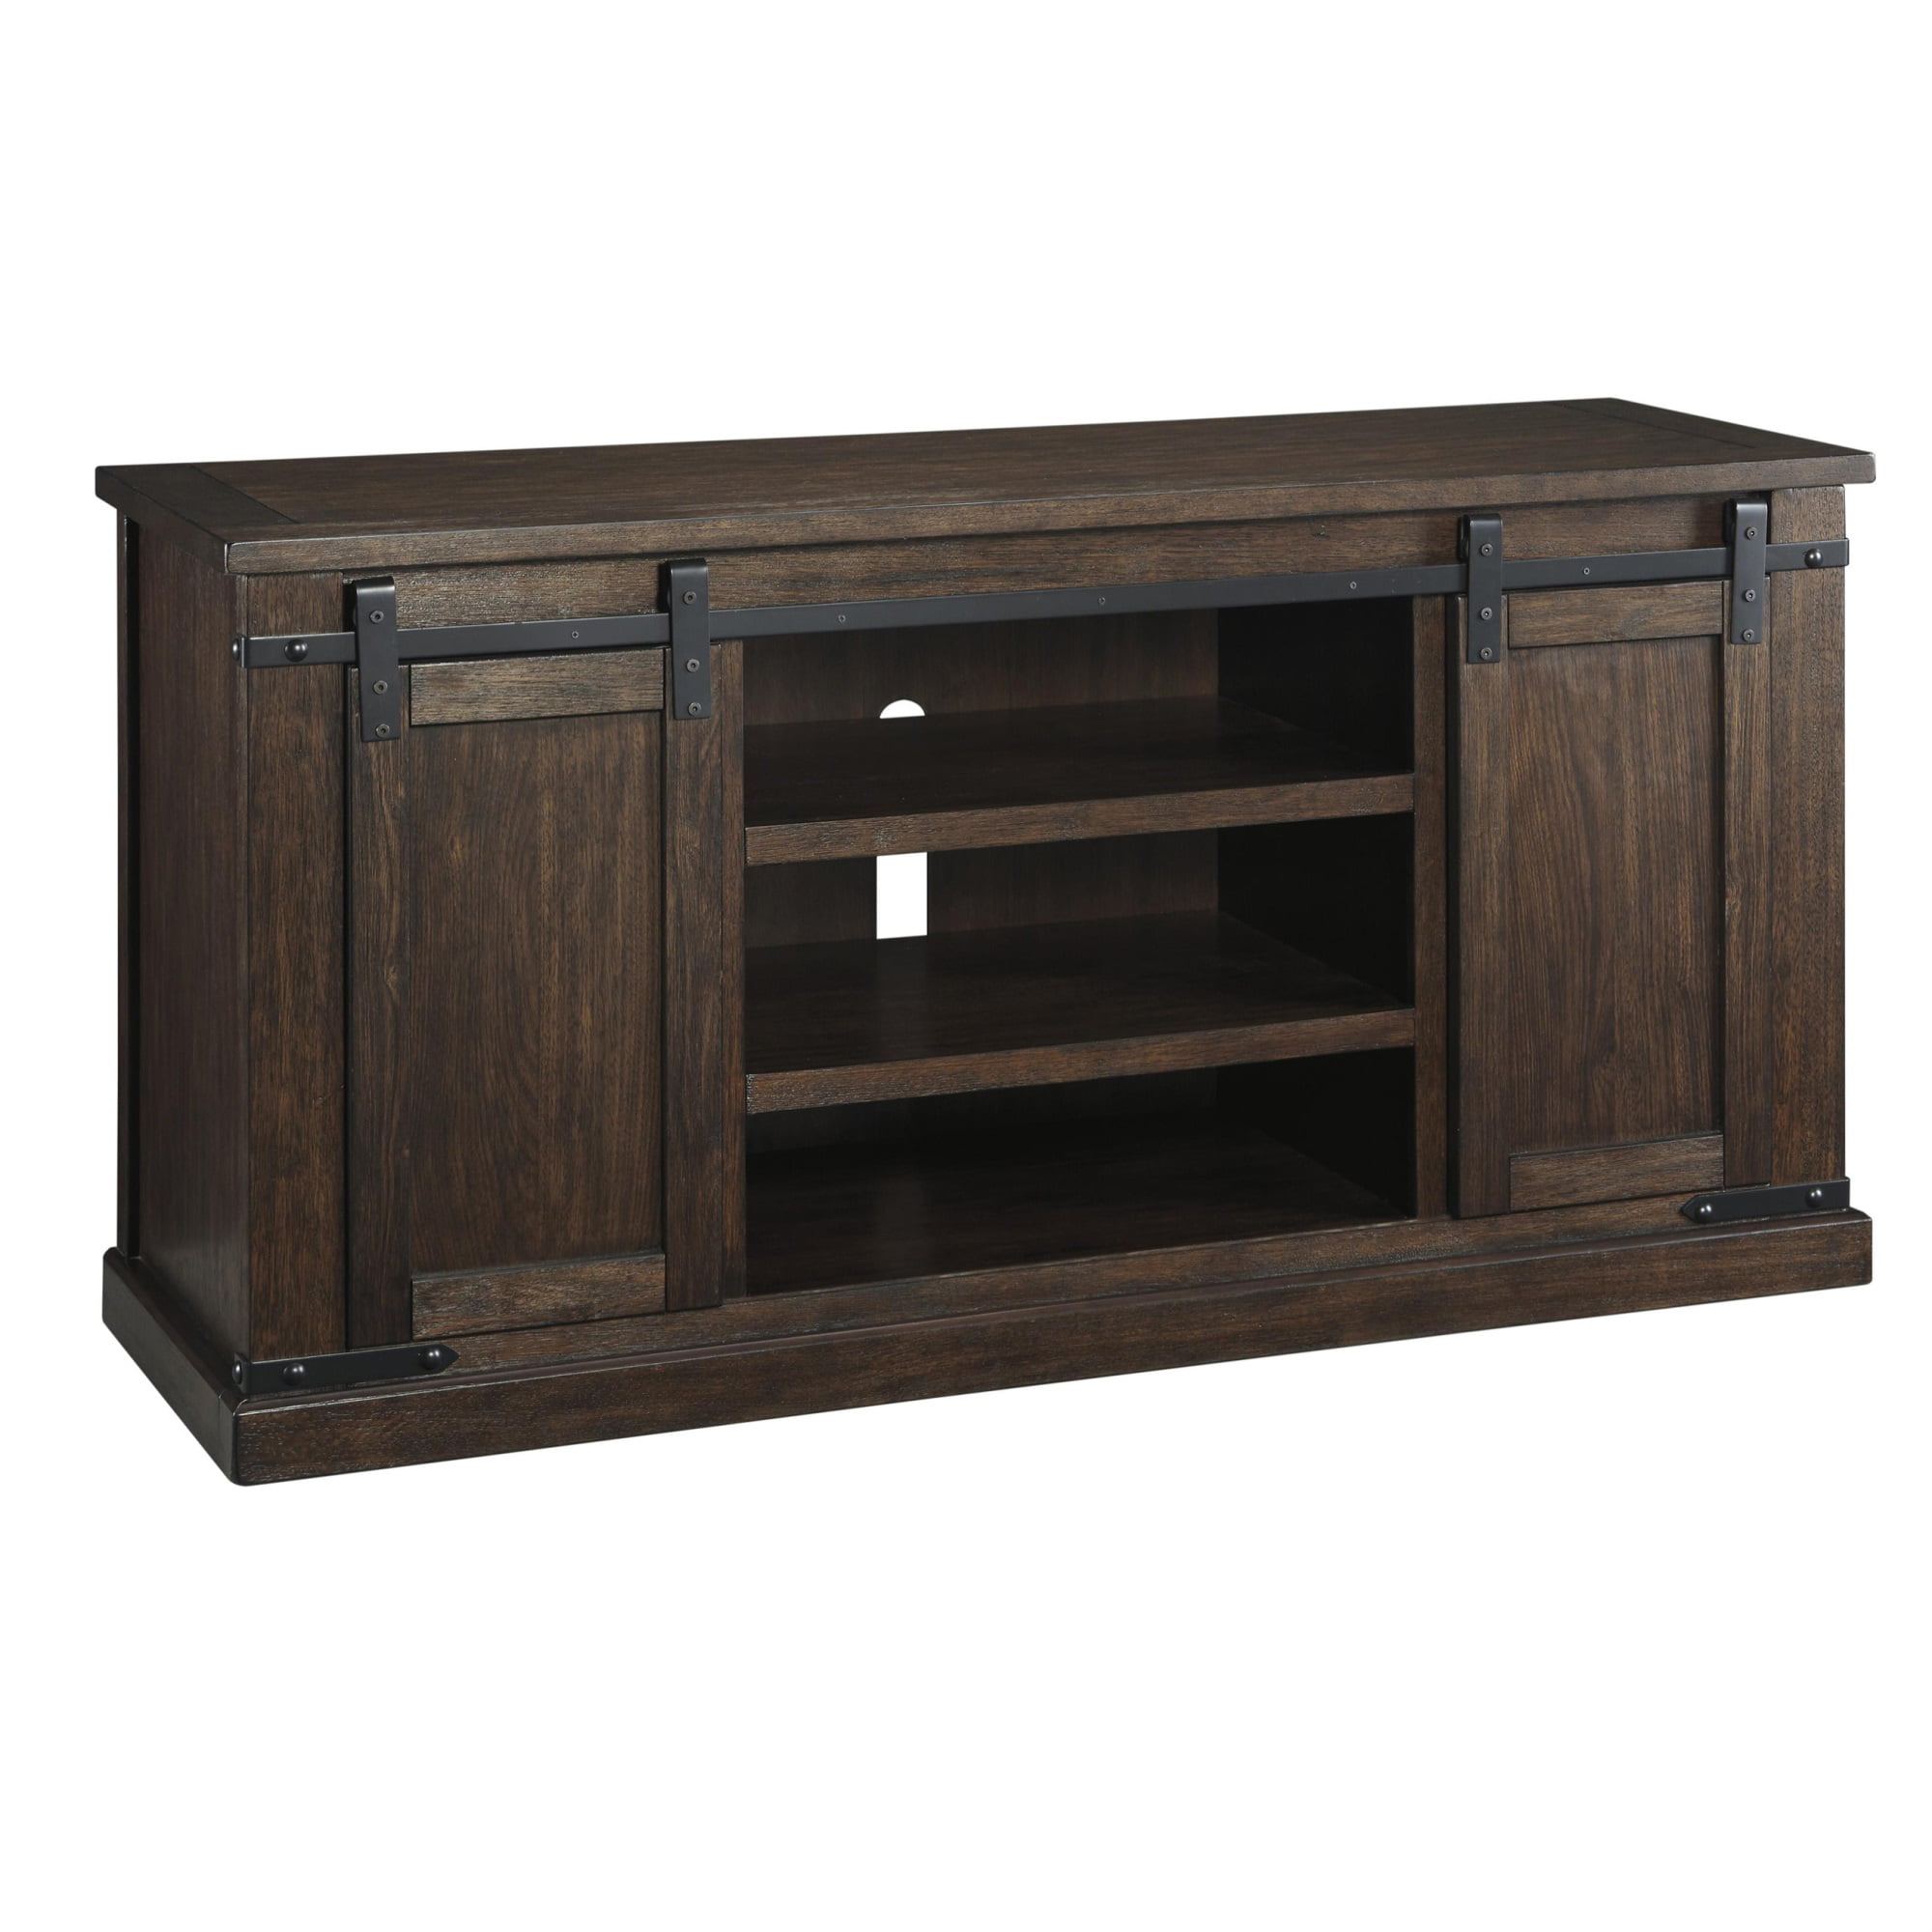 Picture of Benjara BM210795 Large Wooden TV Stand with 2 Barn Sliding Doors & 6 Shelves - Brown - 30 x 60 x 20 in.